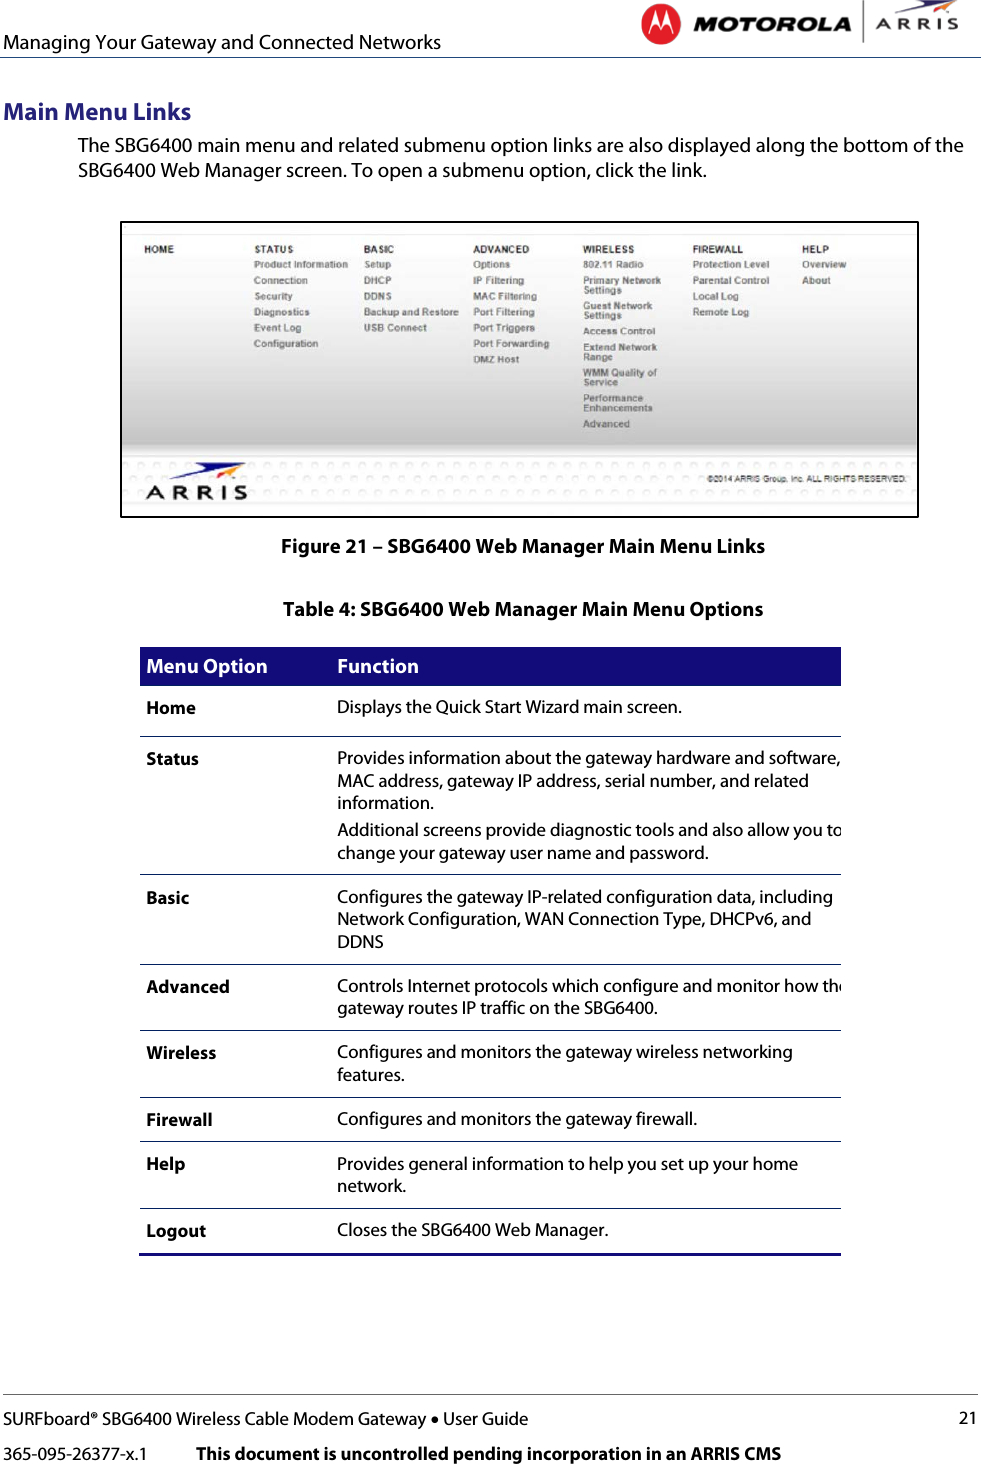 Managing Your Gateway and Connected Networks   SURFboard® SBG6400 Wireless Cable Modem Gateway • User Guide 21 365-095-26377-x.1            This document is uncontrolled pending incorporation in an ARRIS CMS  Main Menu Links The SBG6400 main menu and related submenu option links are also displayed along the bottom of the SBG6400 Web Manager screen. To open a submenu option, click the link.  Figure 21 – SBG6400 Web Manager Main Menu Links Table 4: SBG6400 Web Manager Main Menu Options Menu Option Function Home Displays the Quick Start Wizard main screen. Status Provides information about the gateway hardware and software, MAC address, gateway IP address, serial number, and related information. Additional screens provide diagnostic tools and also allow you to change your gateway user name and password. Basic Configures the gateway IP-related configuration data, including Network Configuration, WAN Connection Type, DHCPv6, and DDNS Advanced Controls Internet protocols which configure and monitor how the gateway routes IP traffic on the SBG6400. Wireless Configures and monitors the gateway wireless networking features. Firewall Configures and monitors the gateway firewall. Help Provides general information to help you set up your home network. Logout Closes the SBG6400 Web Manager. 